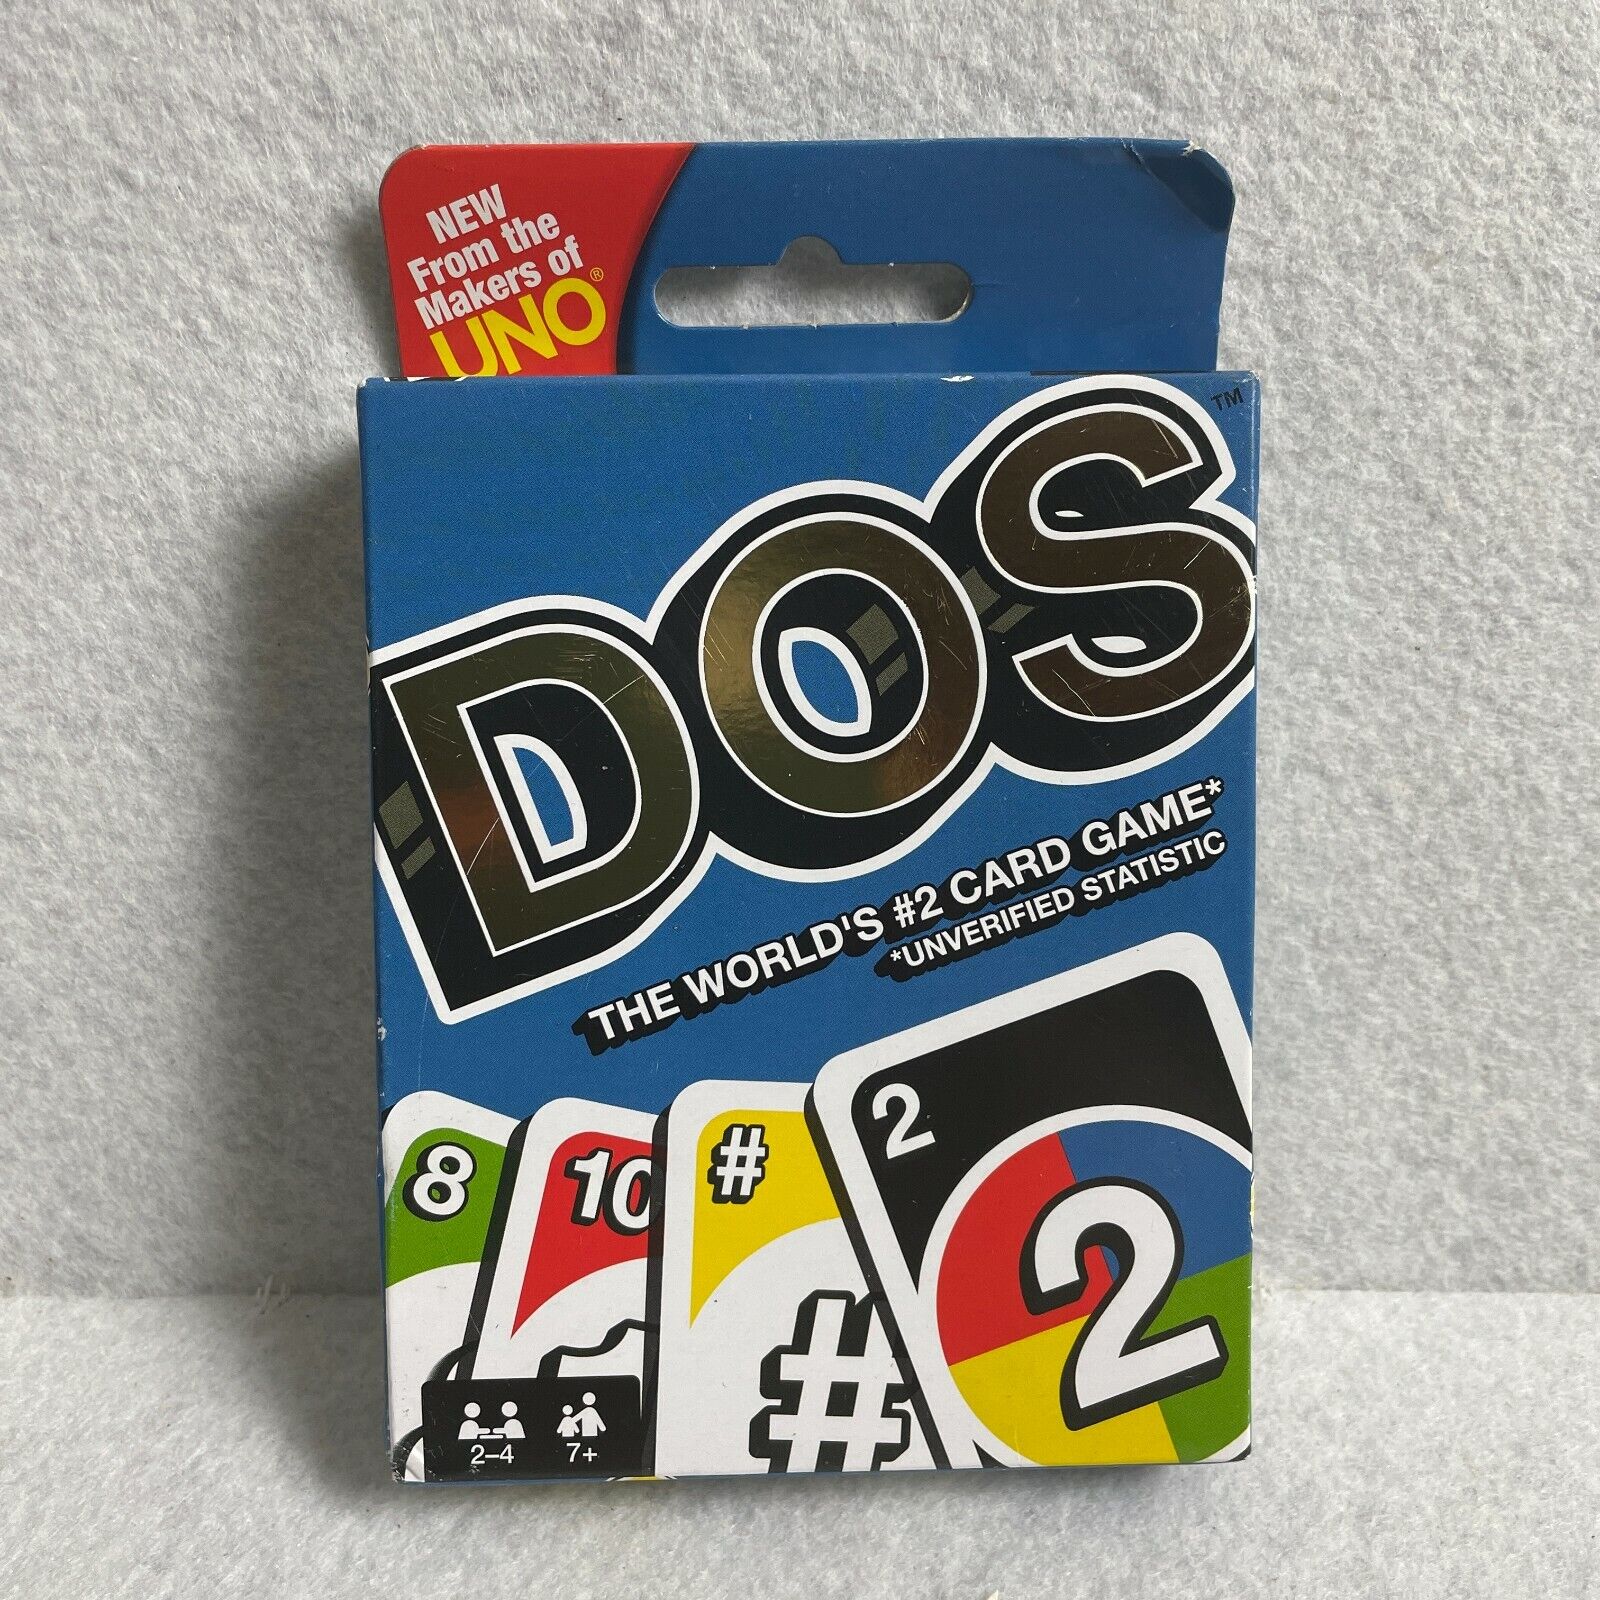 Mattel - DOS - Card Game - The World’s #2 Card Game